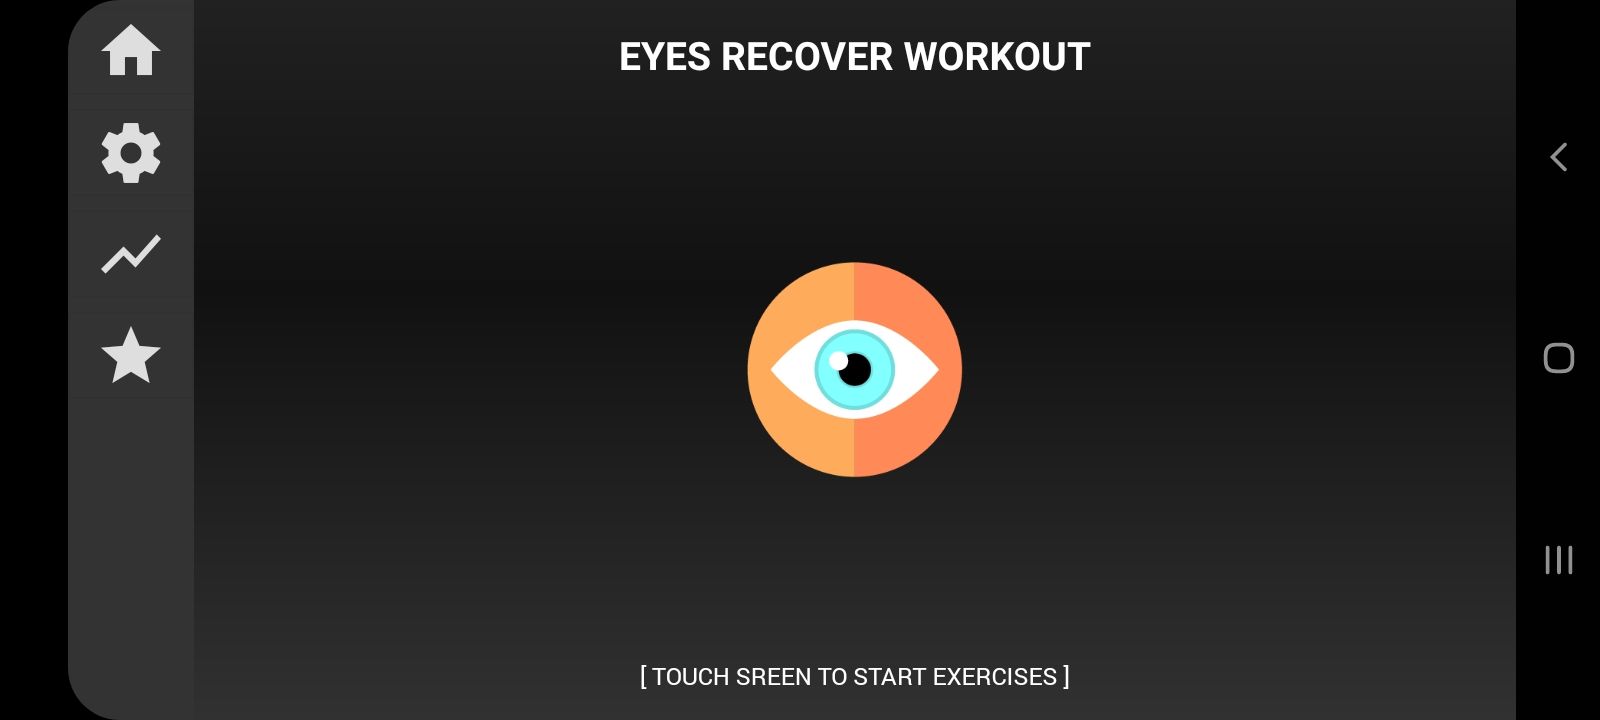 Eyes Recovery Workout app page